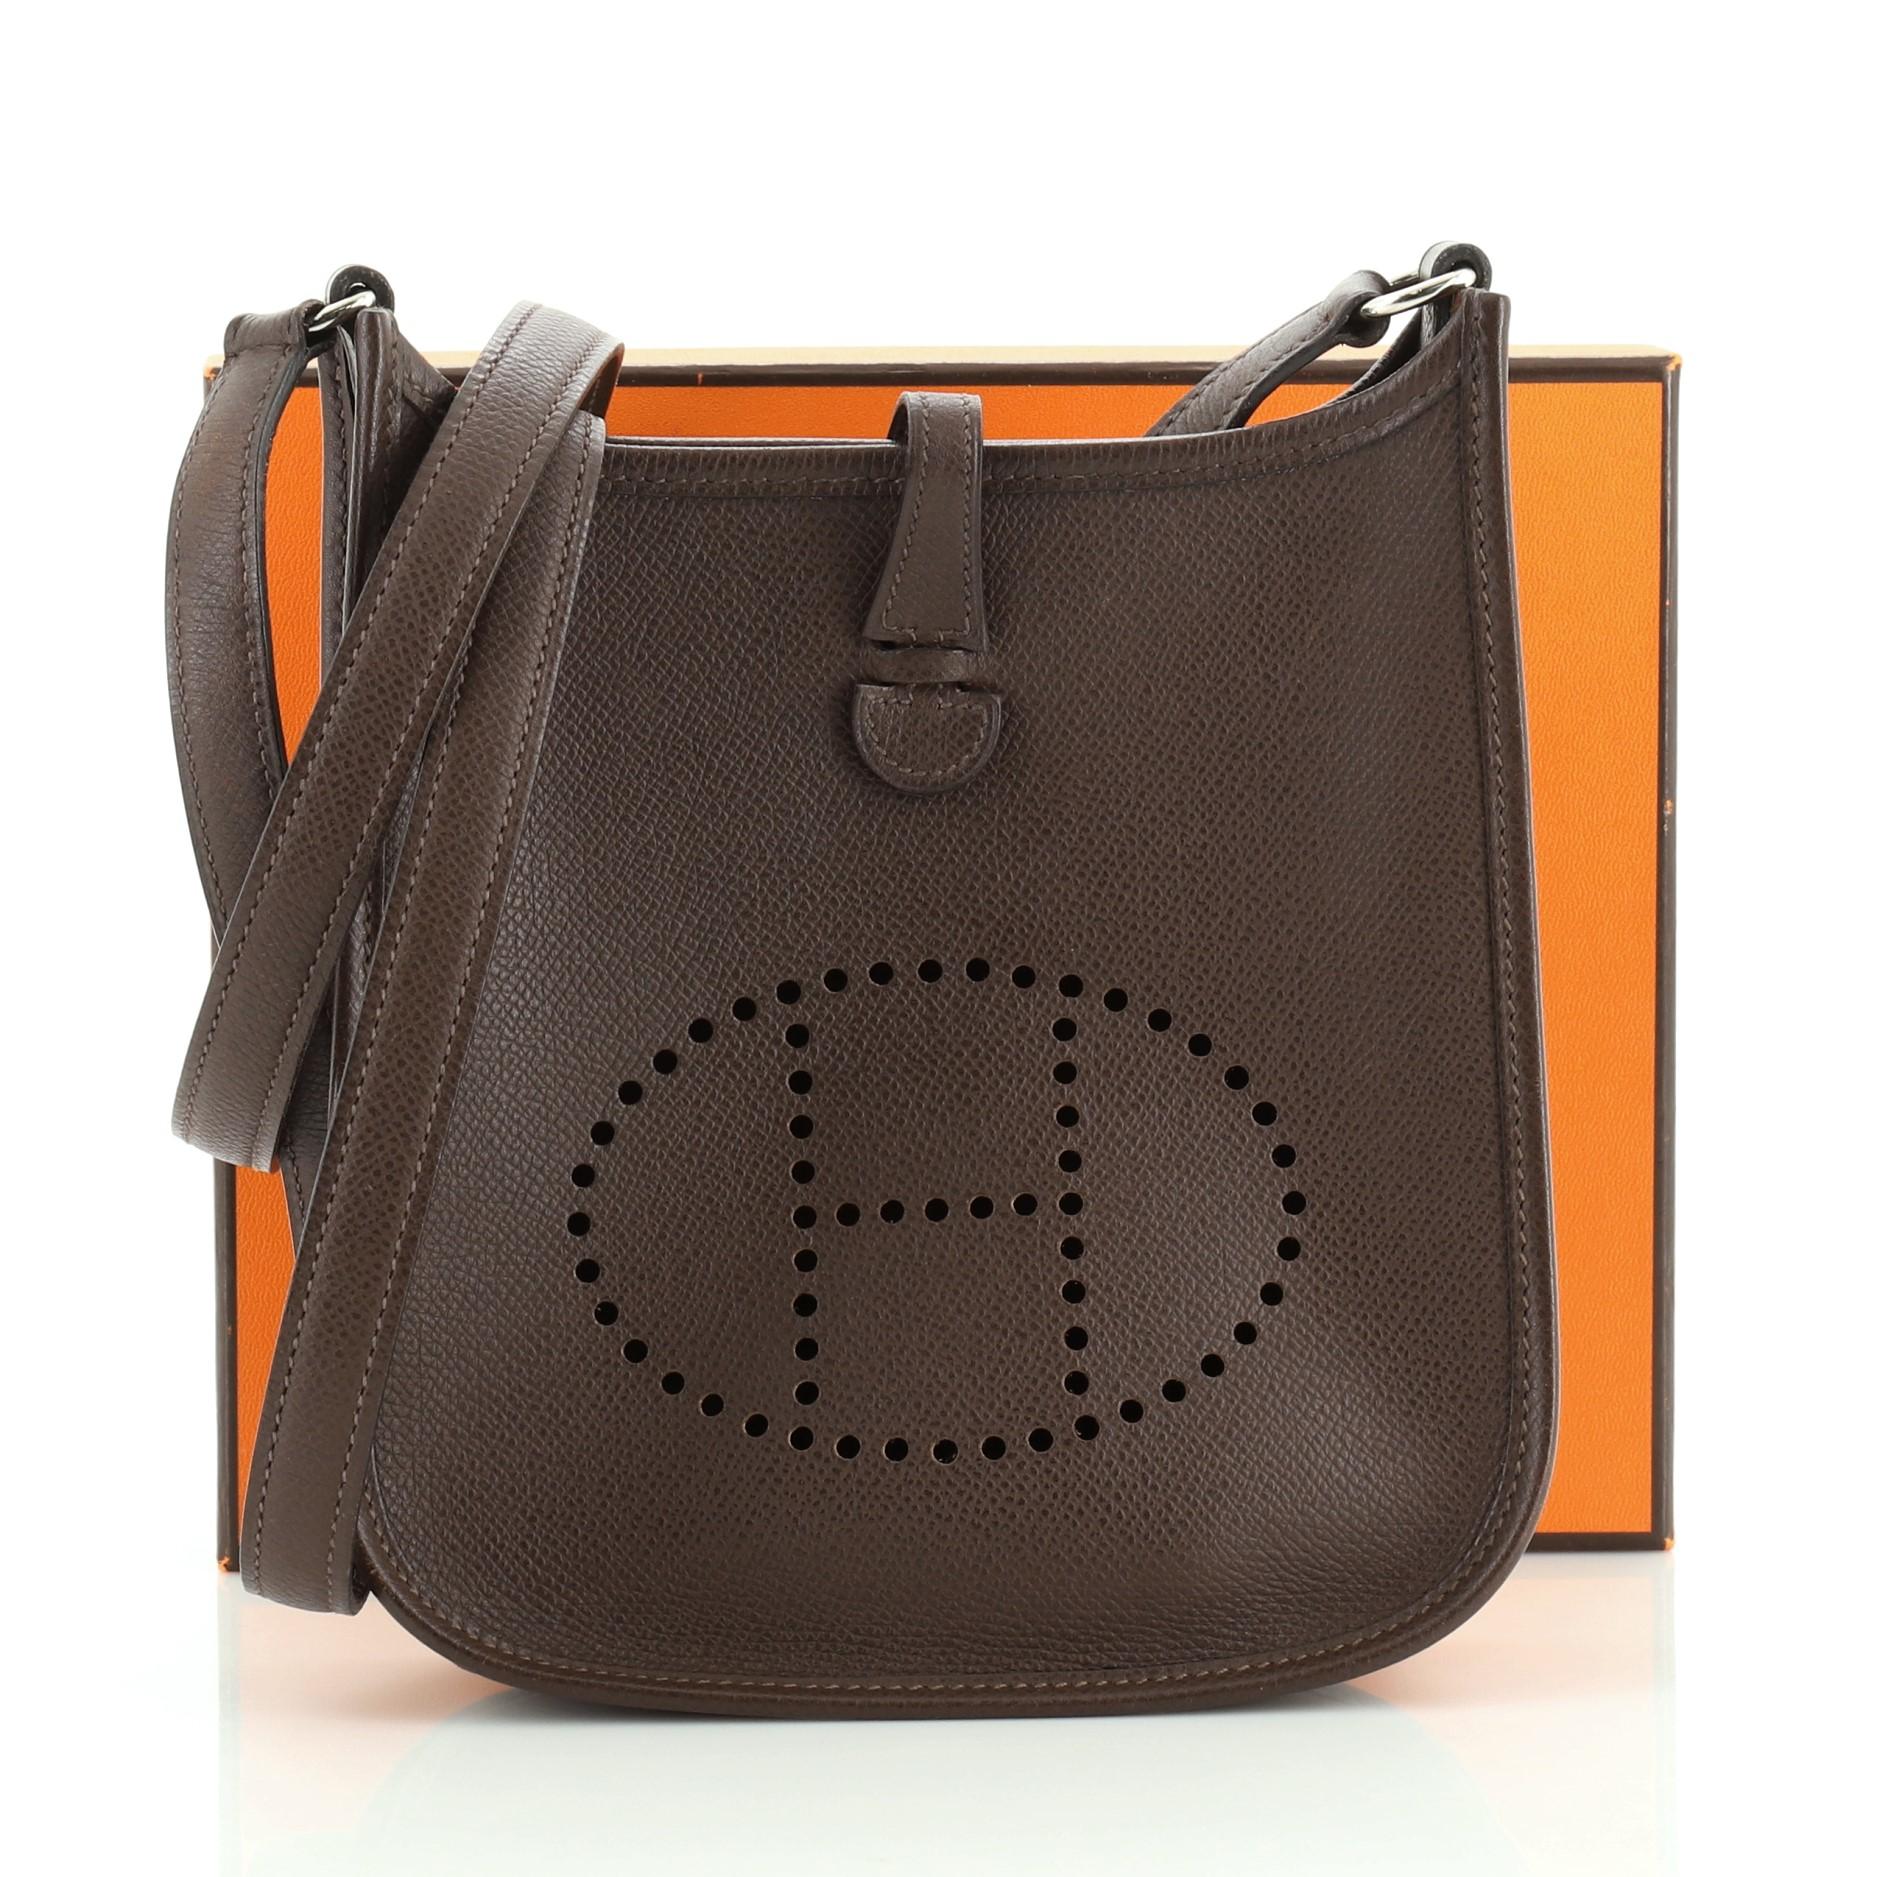 This Hermes Long Strap Evelyne Crossbody Bag Epsom TPM, crafted from Chocolate brown Epsom leather, features perforated H at the front, long shoulder strap and palladium hardware. It opens to a Chocolate brown raw leather interior. Date stamp reads: